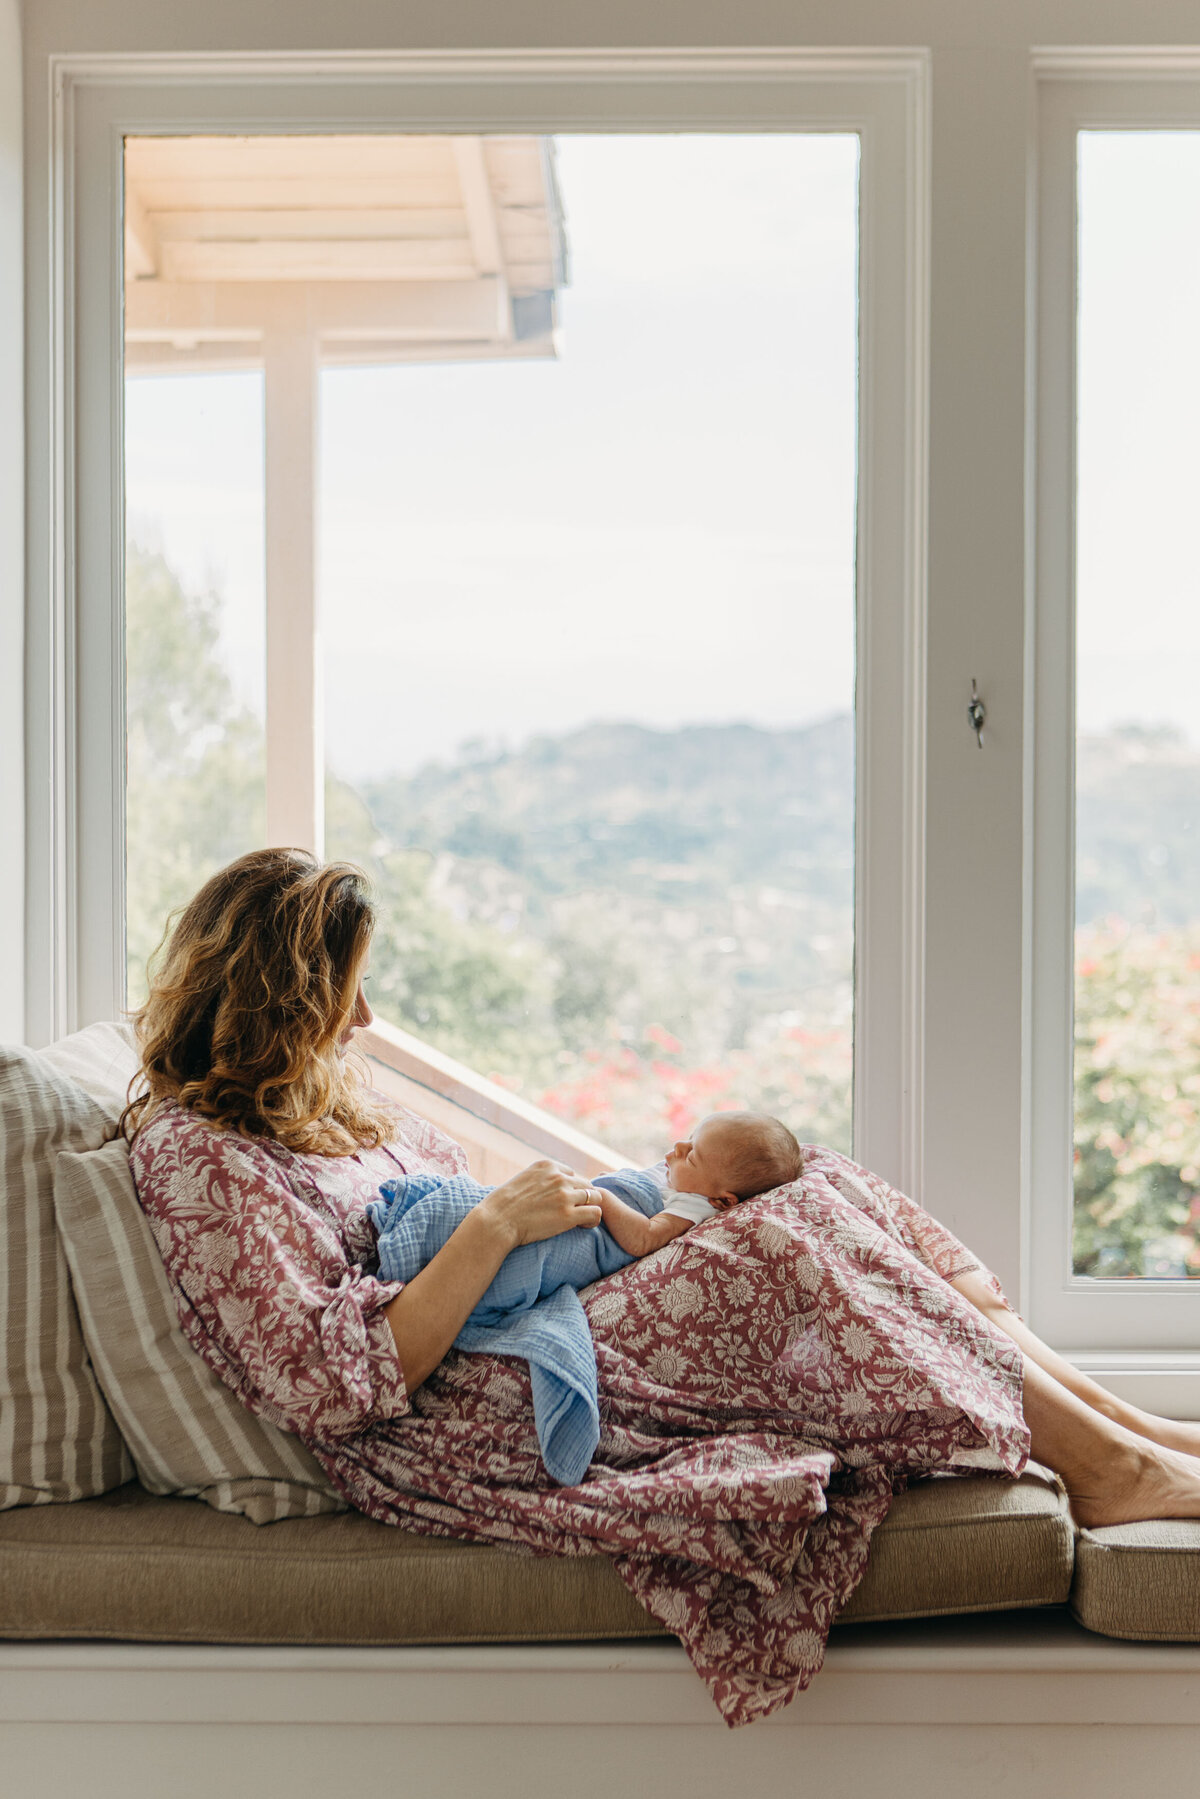 Mom sits by the window with view of Los Angeles while crading newborn baby in her lap.